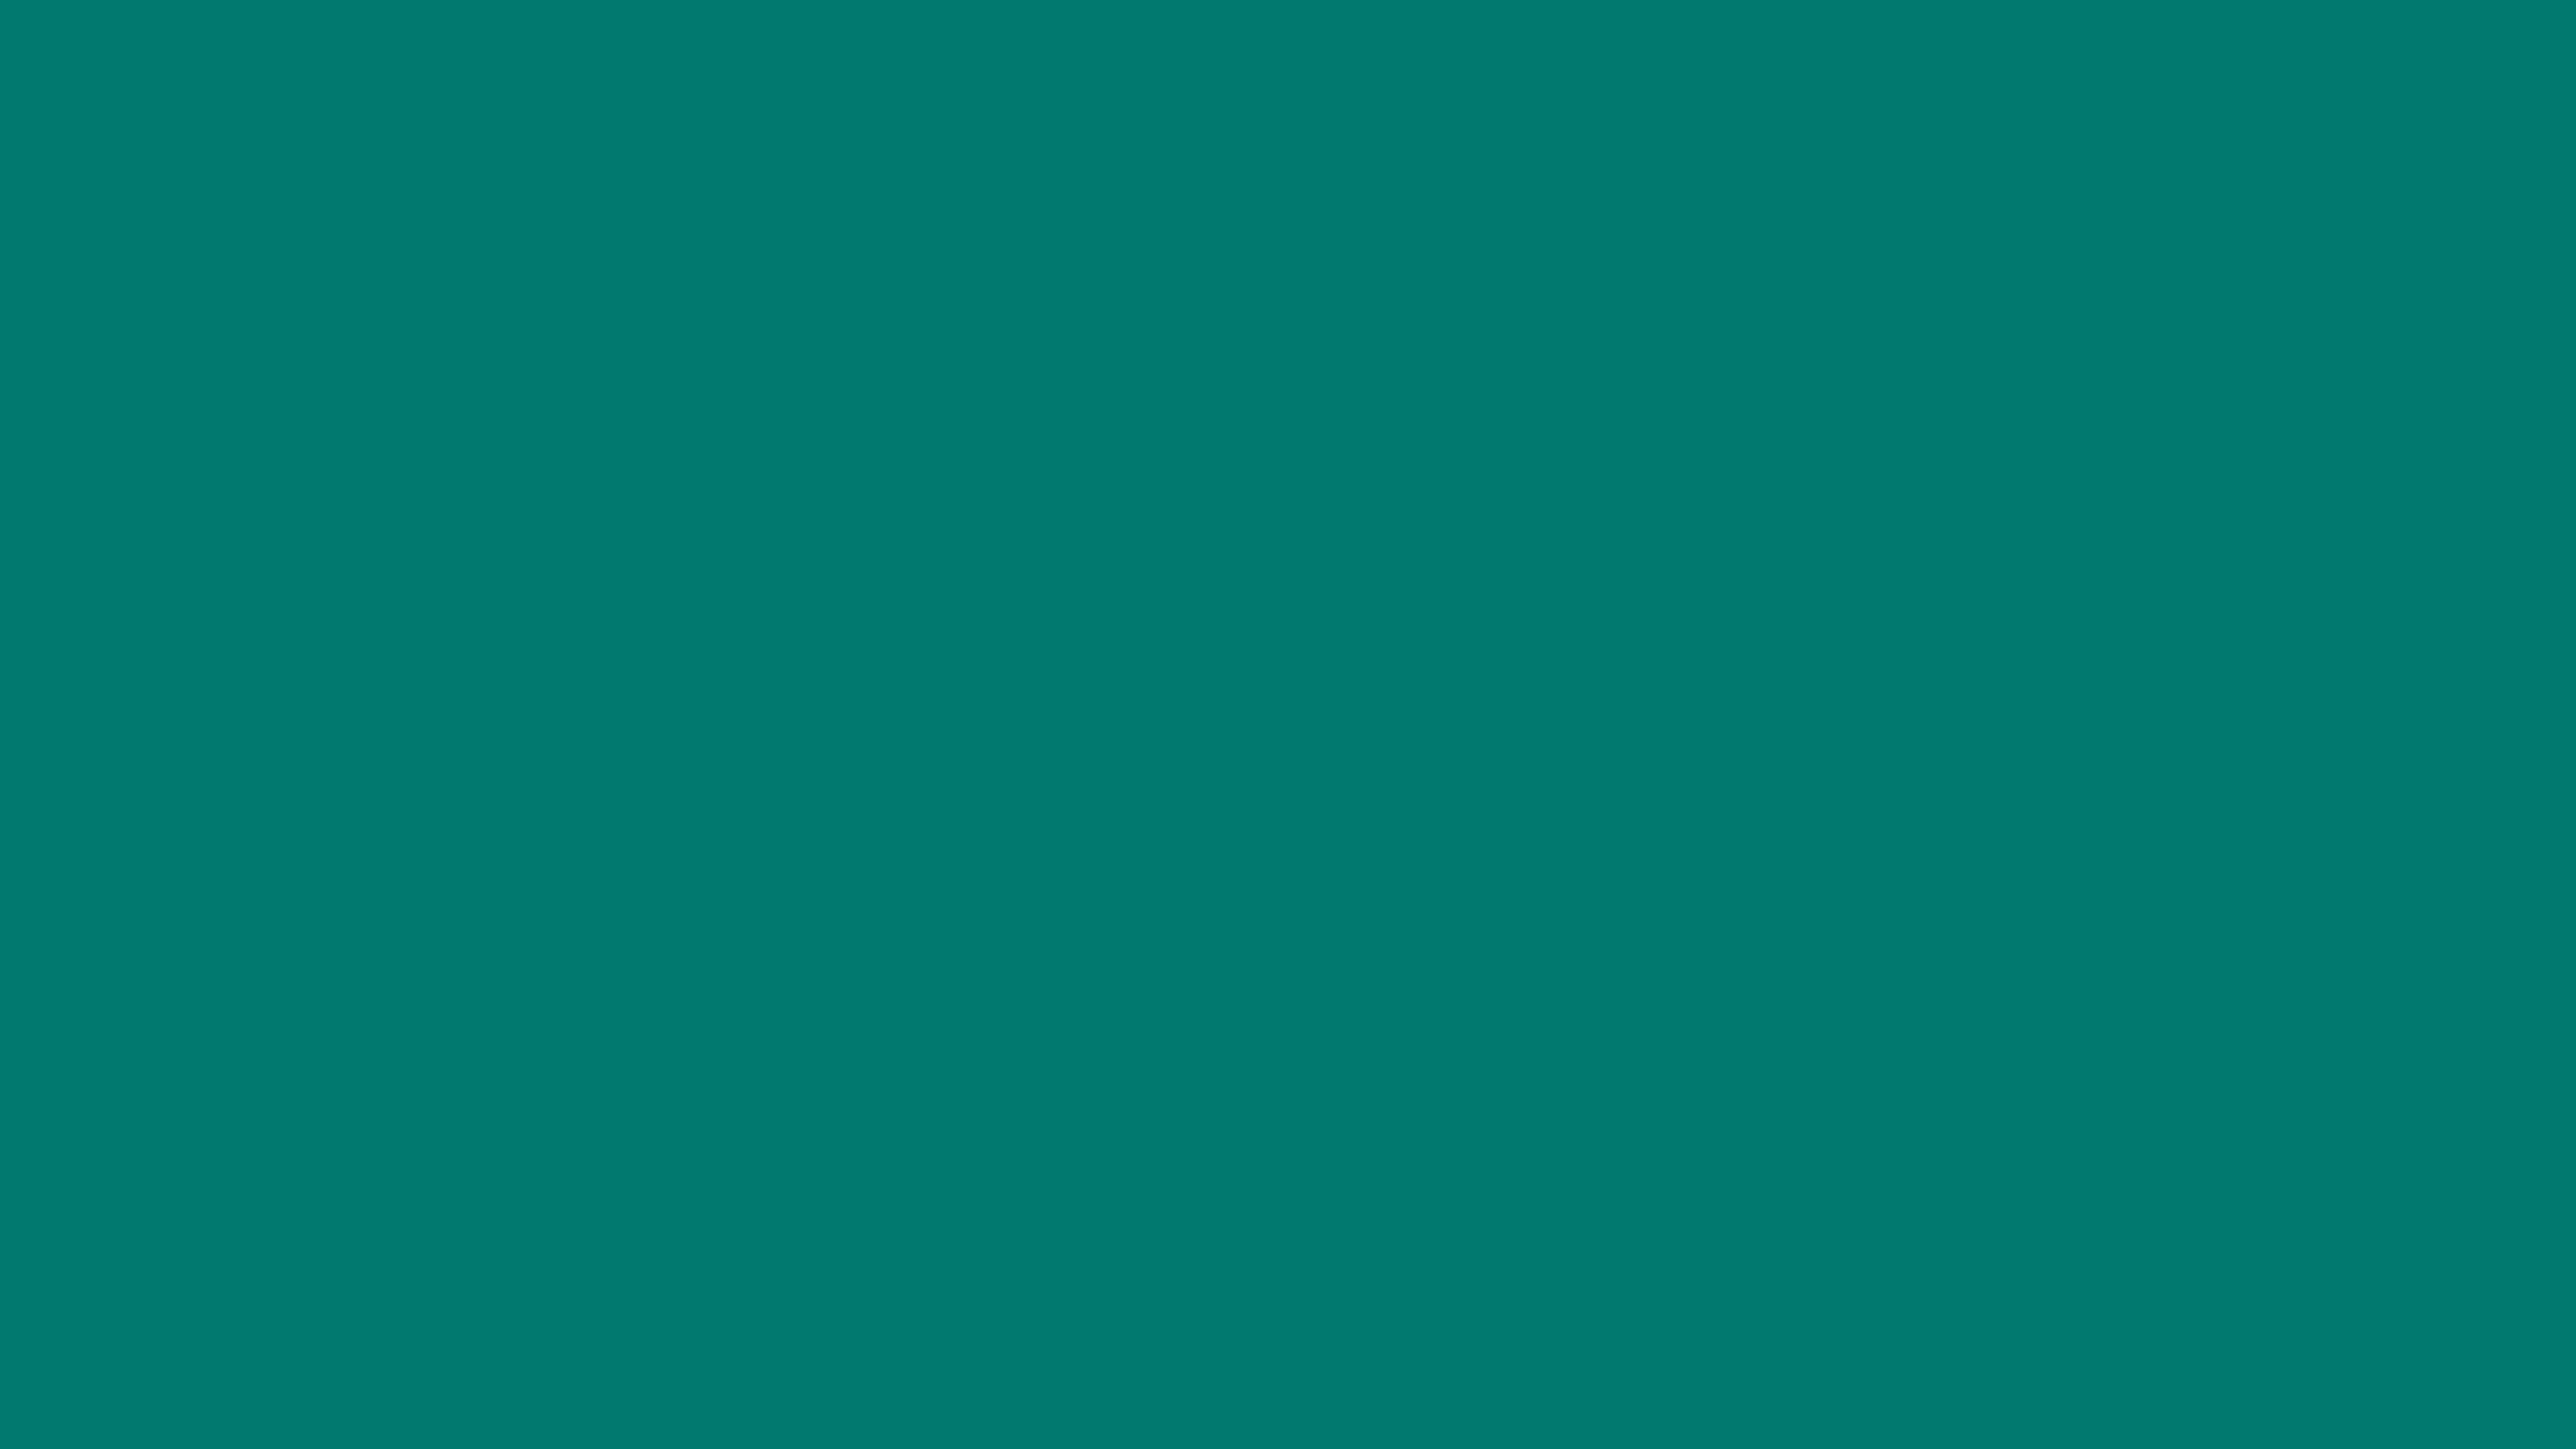 7680x4320 Pine Green Solid Color Background